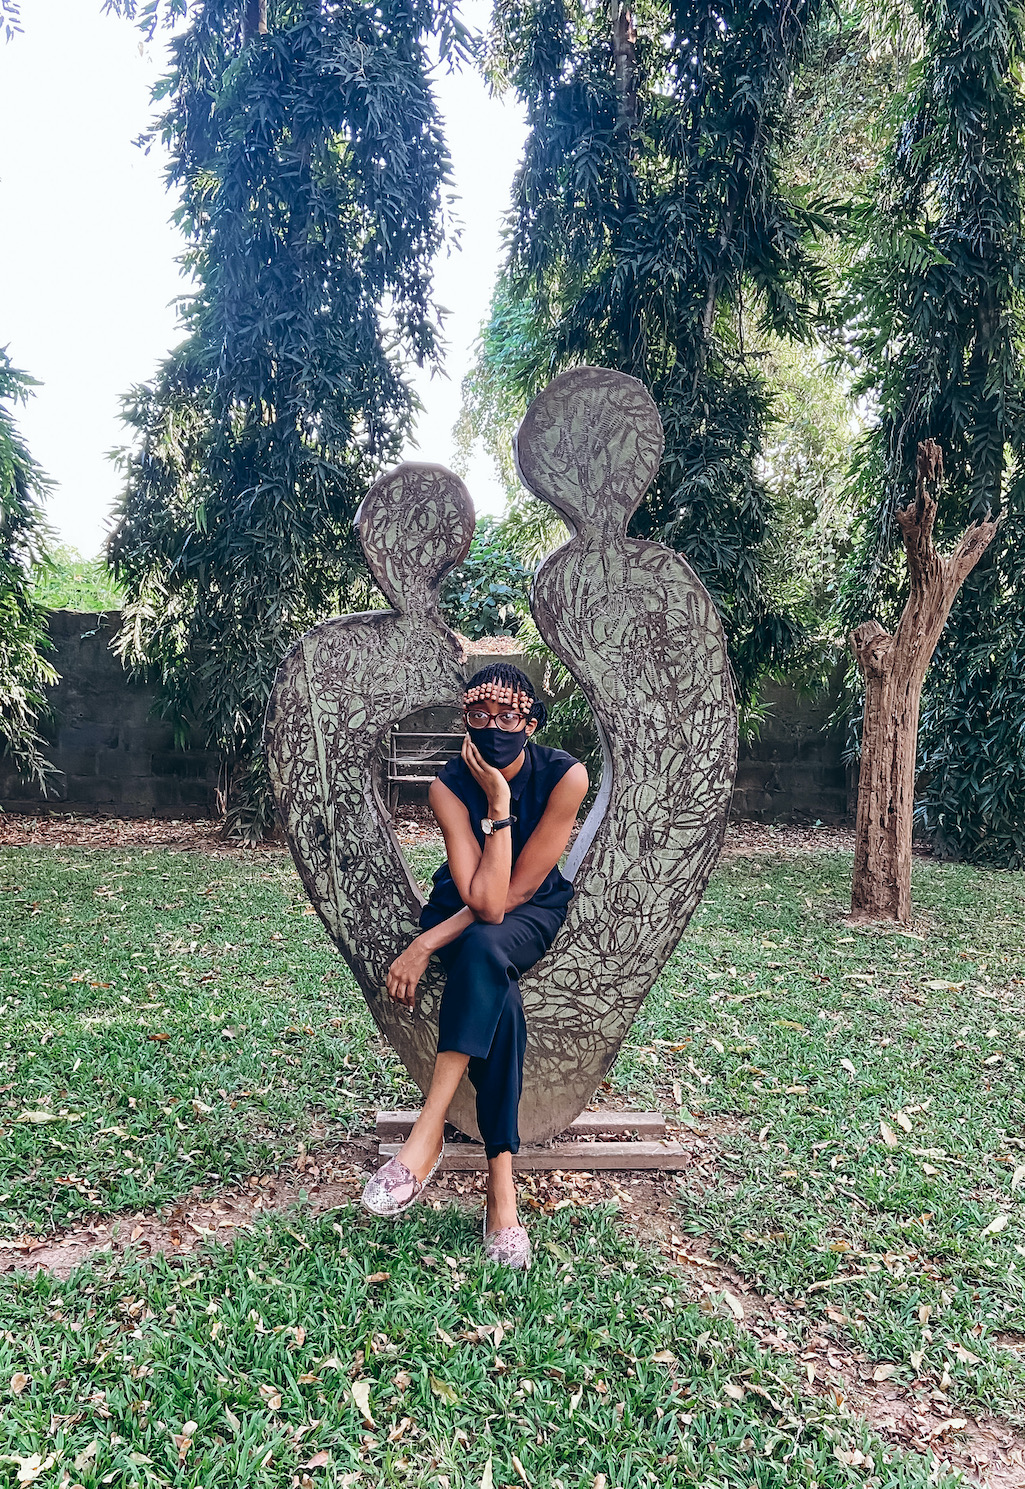 Cassie daves posing with a bronze figure at the Garden at nike guesthouse osogbo